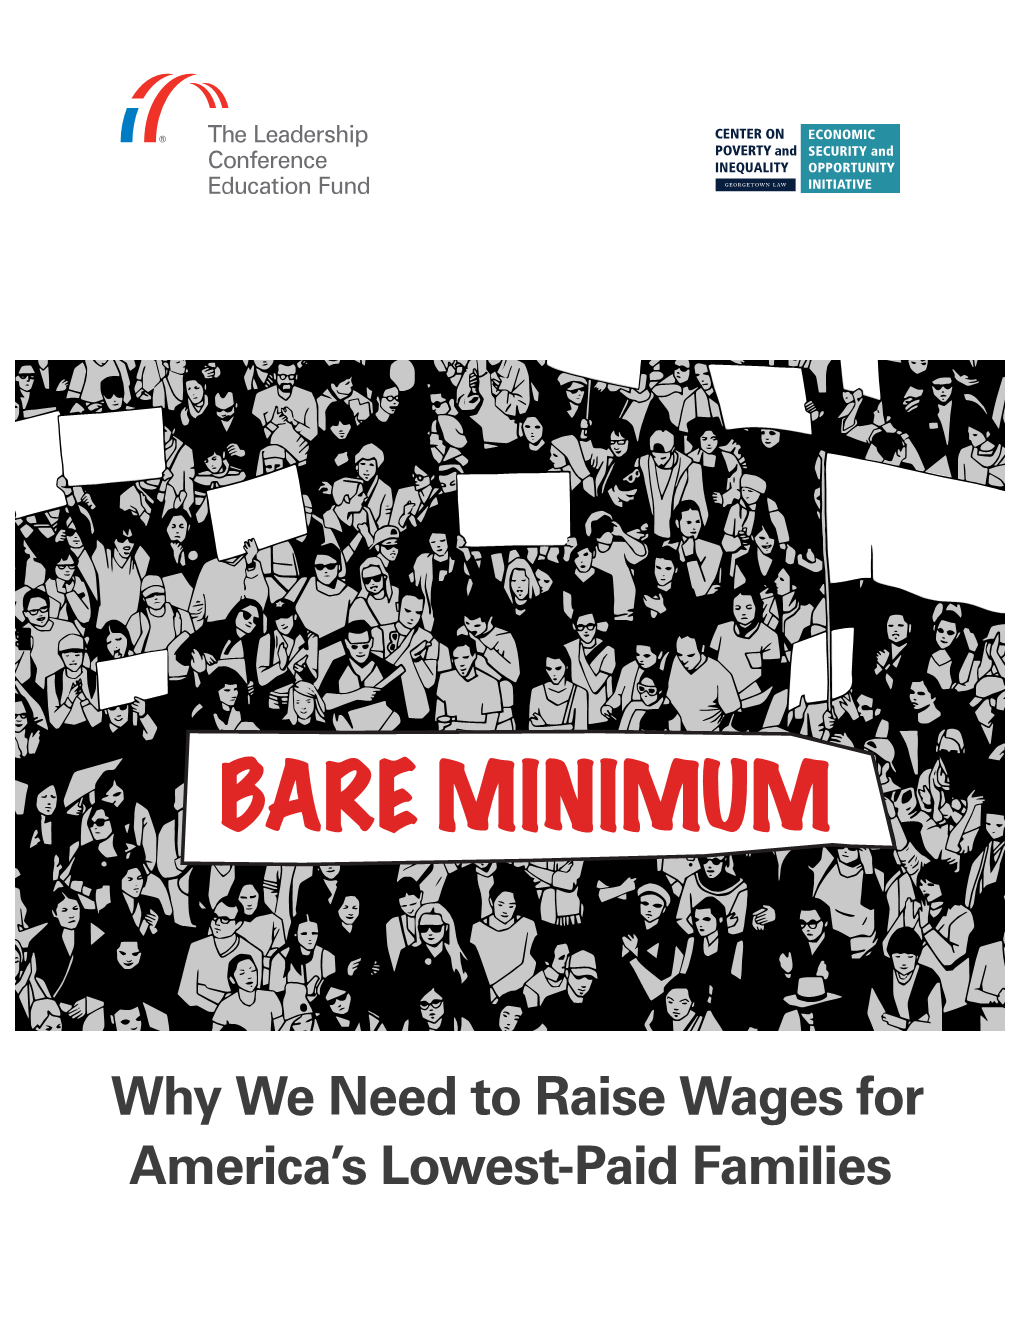 Bare Minimum: Why We Need to Raise Wages for America’S Lowest-Paid Families Is an Initiative of the Leadership Conference Education Fund